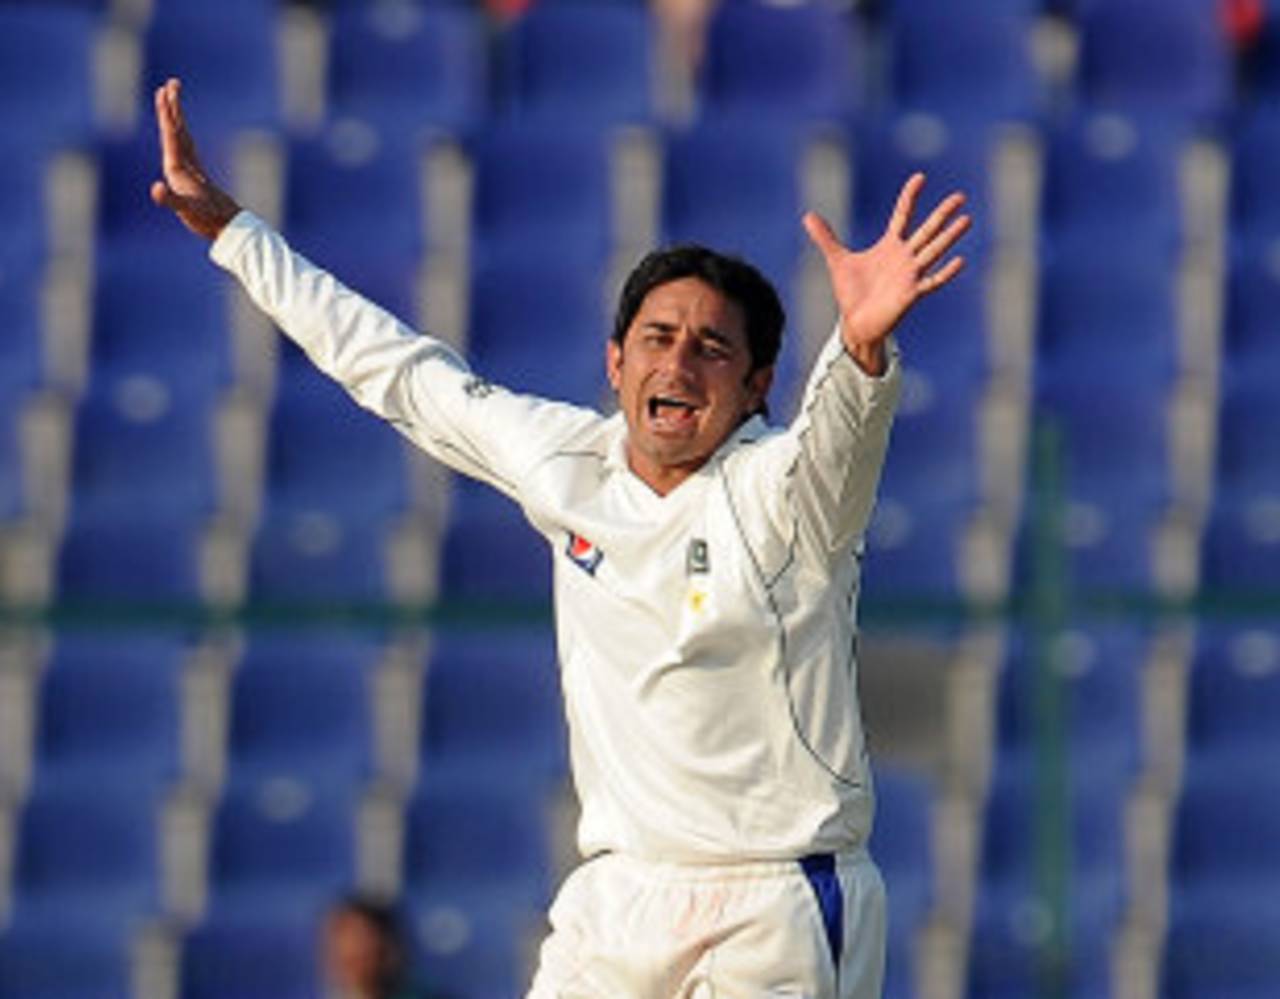 Saeed Ajmal's comments appeared to suggest that he has been allowed 23.5 degrees of flexion by the ICC, due to an earlier arm injury&nbsp;&nbsp;&bull;&nbsp;&nbsp;AFP